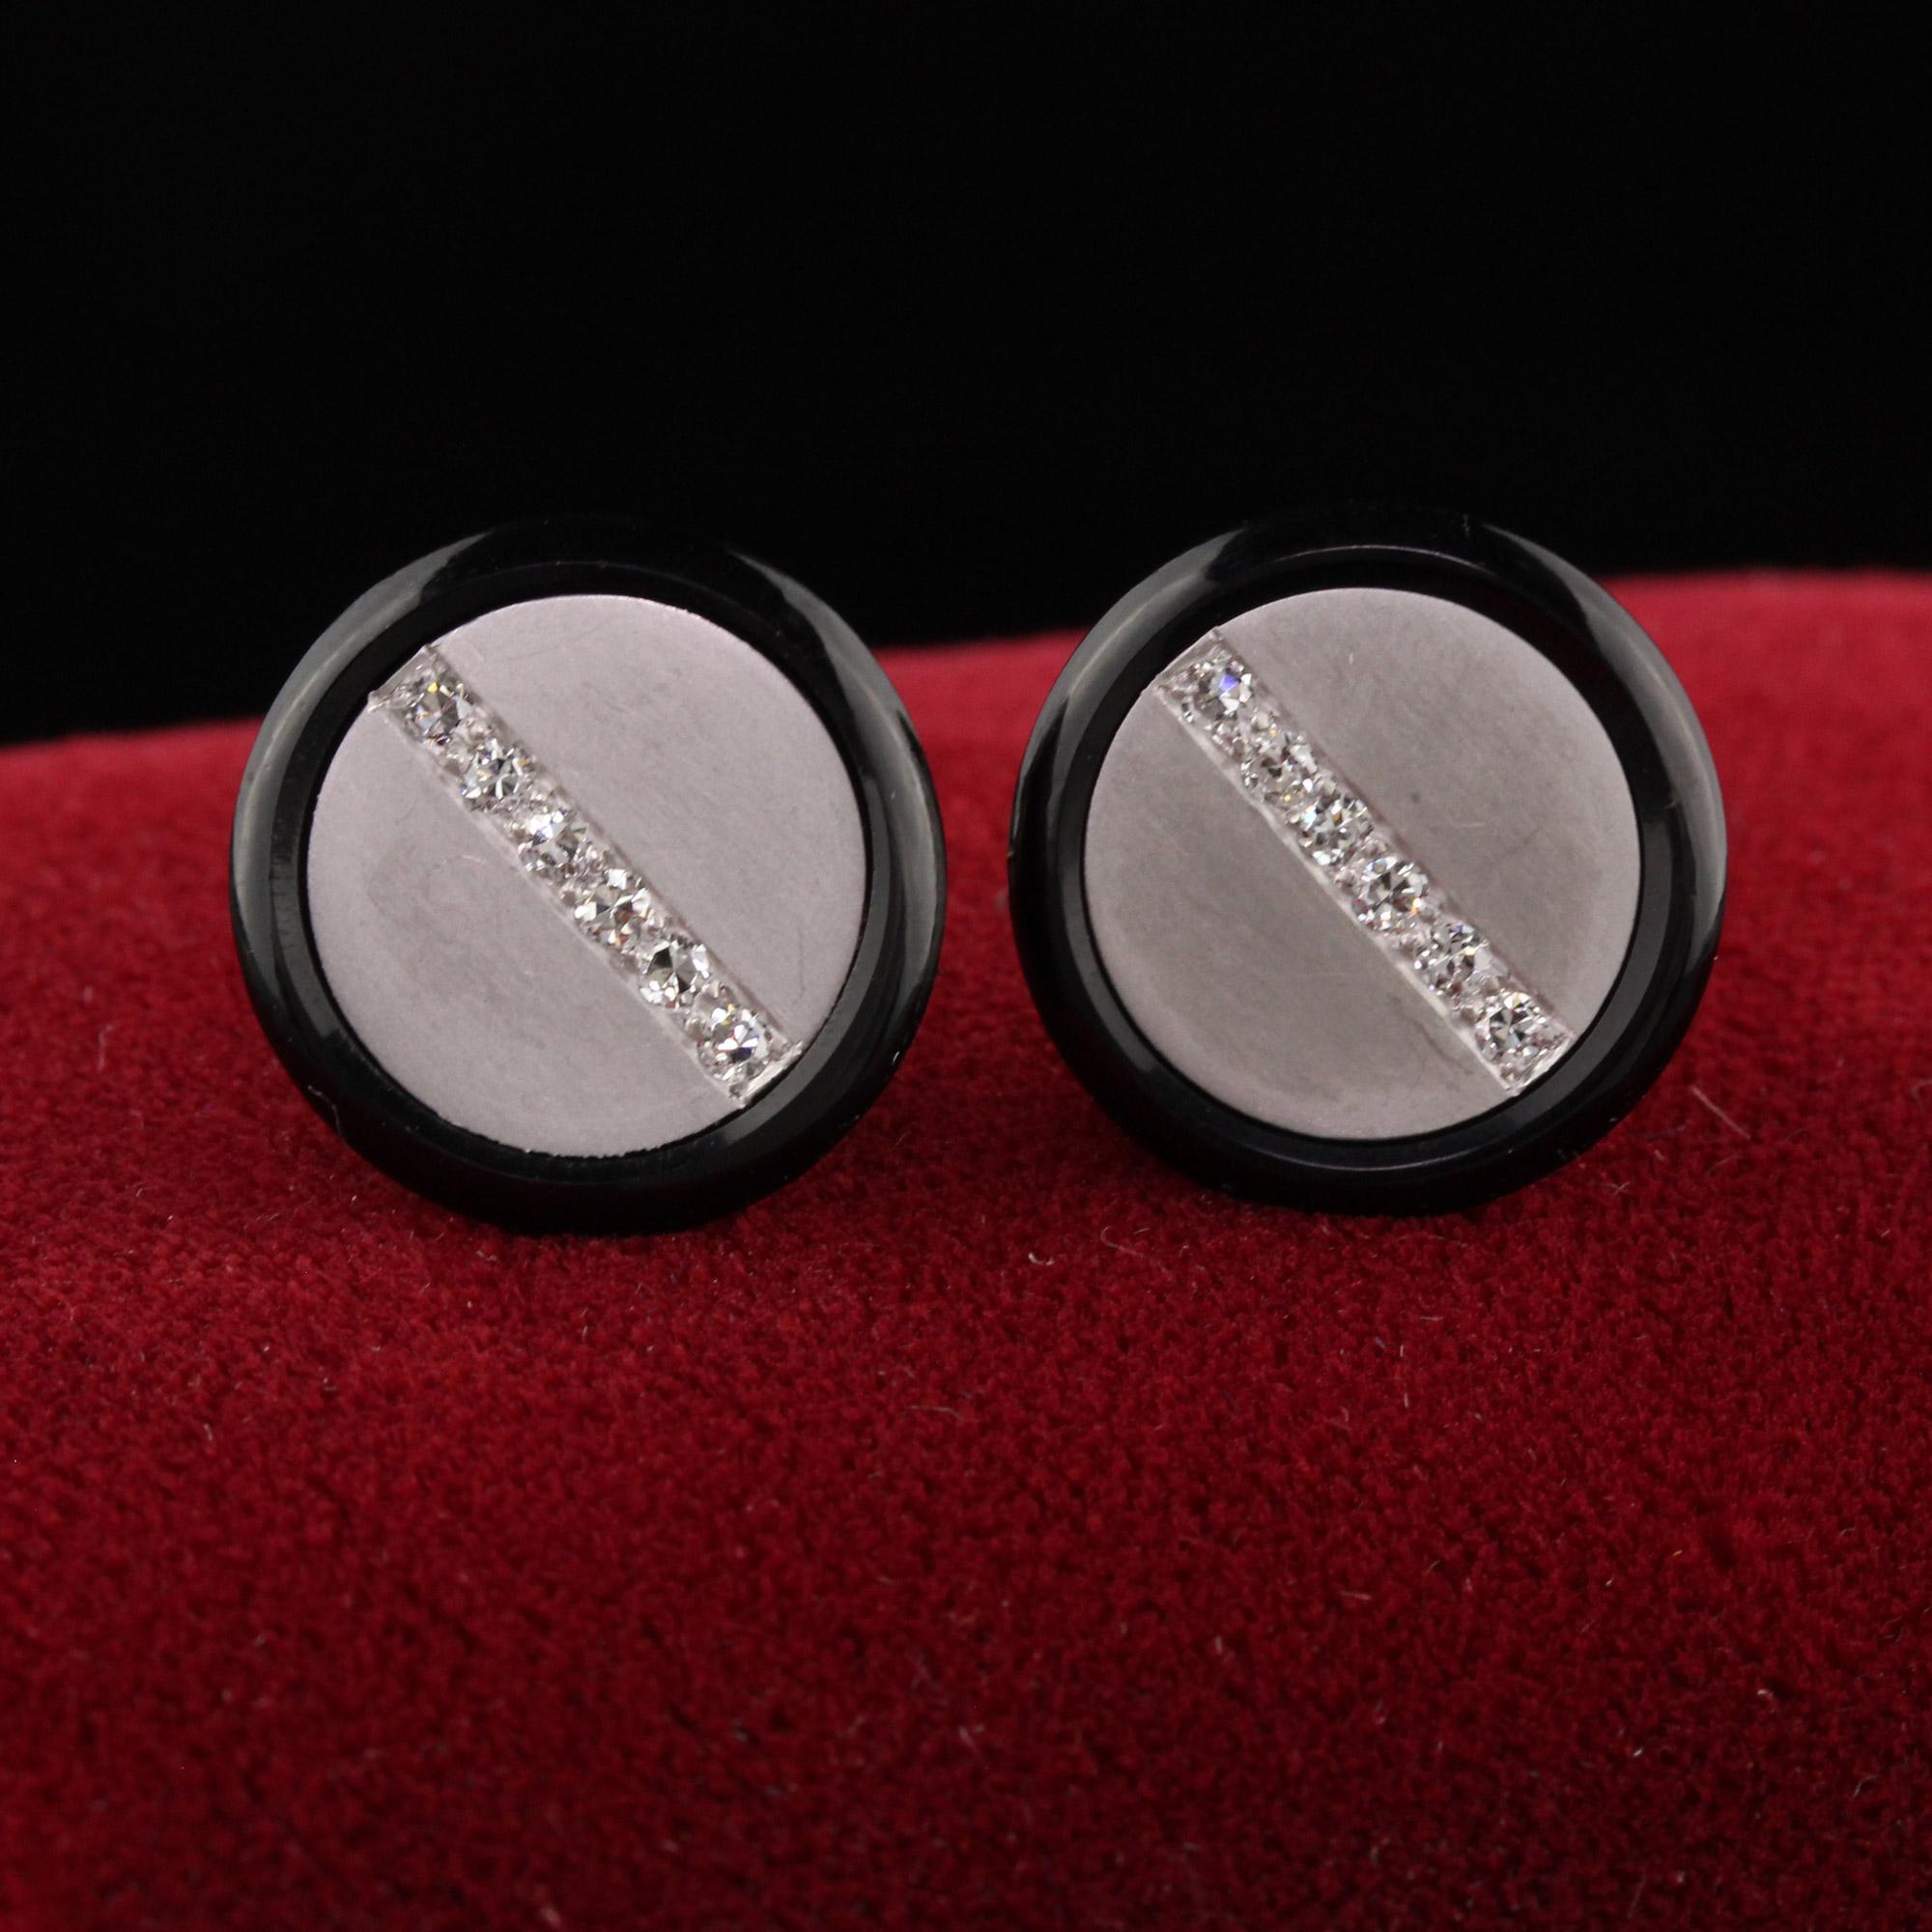 Beautiful Antique Art Deco 14K Yellow Gold Platinum and Onyx Diamond Button Earrings. These beautiful earrings are crafted in 14k yellow gold, onyx, and platinum top. The earrings were converted from a set of cufflink shirt buttons. They are in